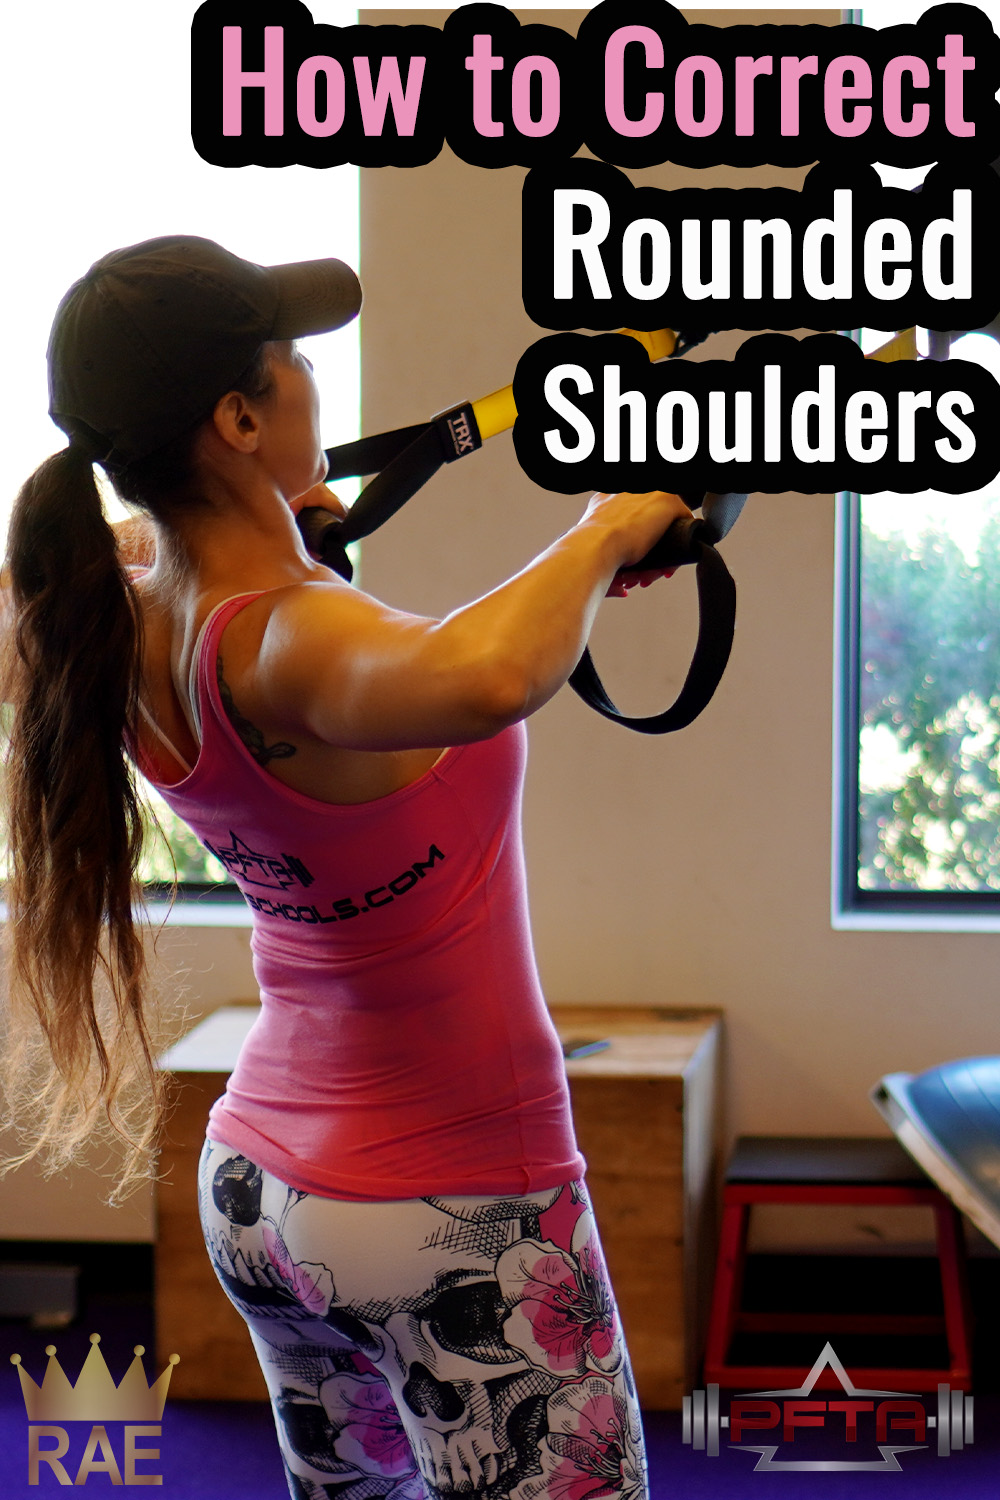 rounded shoulders exercises Archives - FitnessFAQs